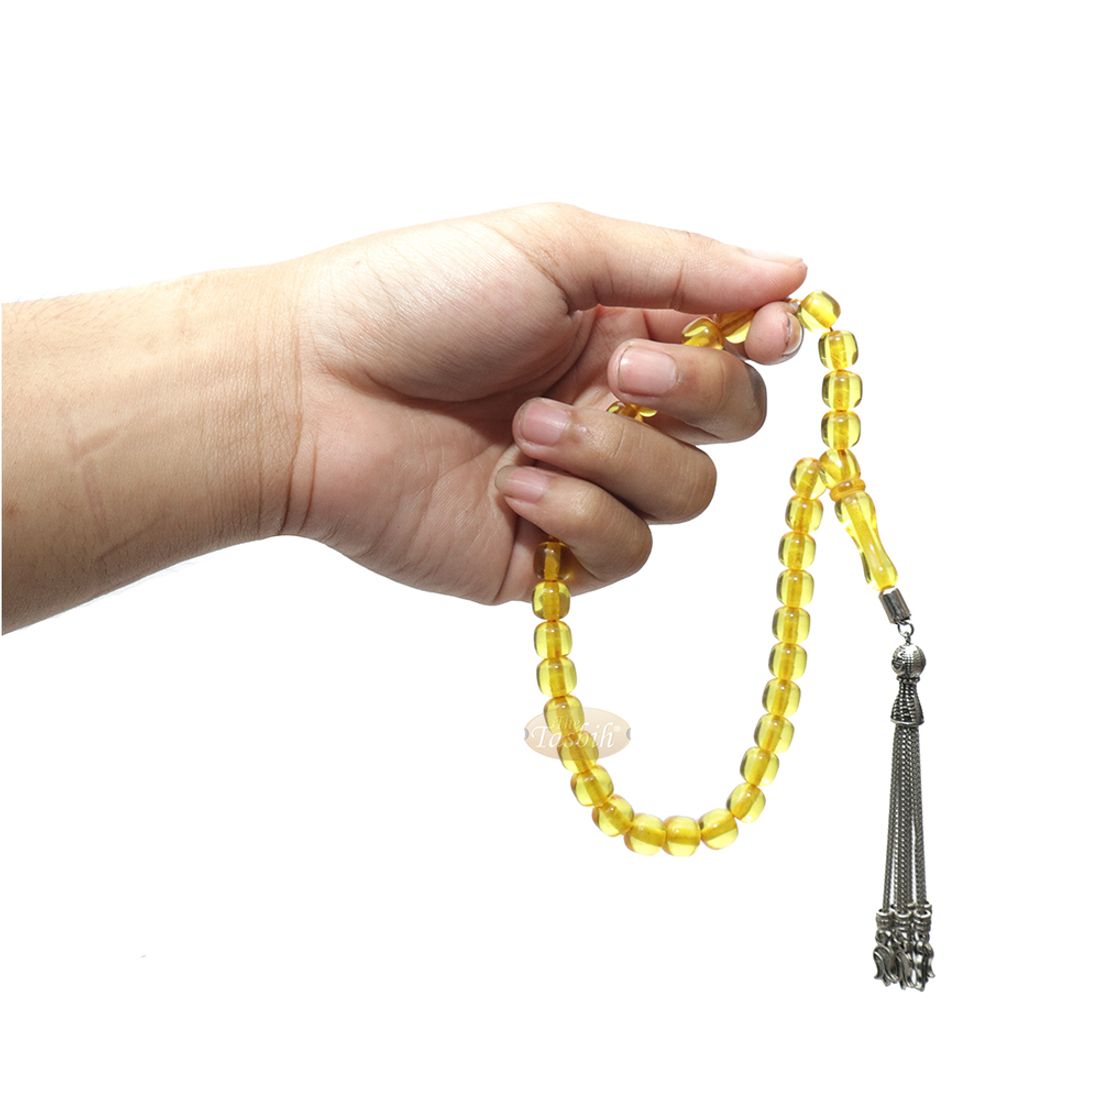 Muslim DHIKR Beads Small 33ct Tasbih 9×8-mm Amber-color Barrel with Tulip Charms